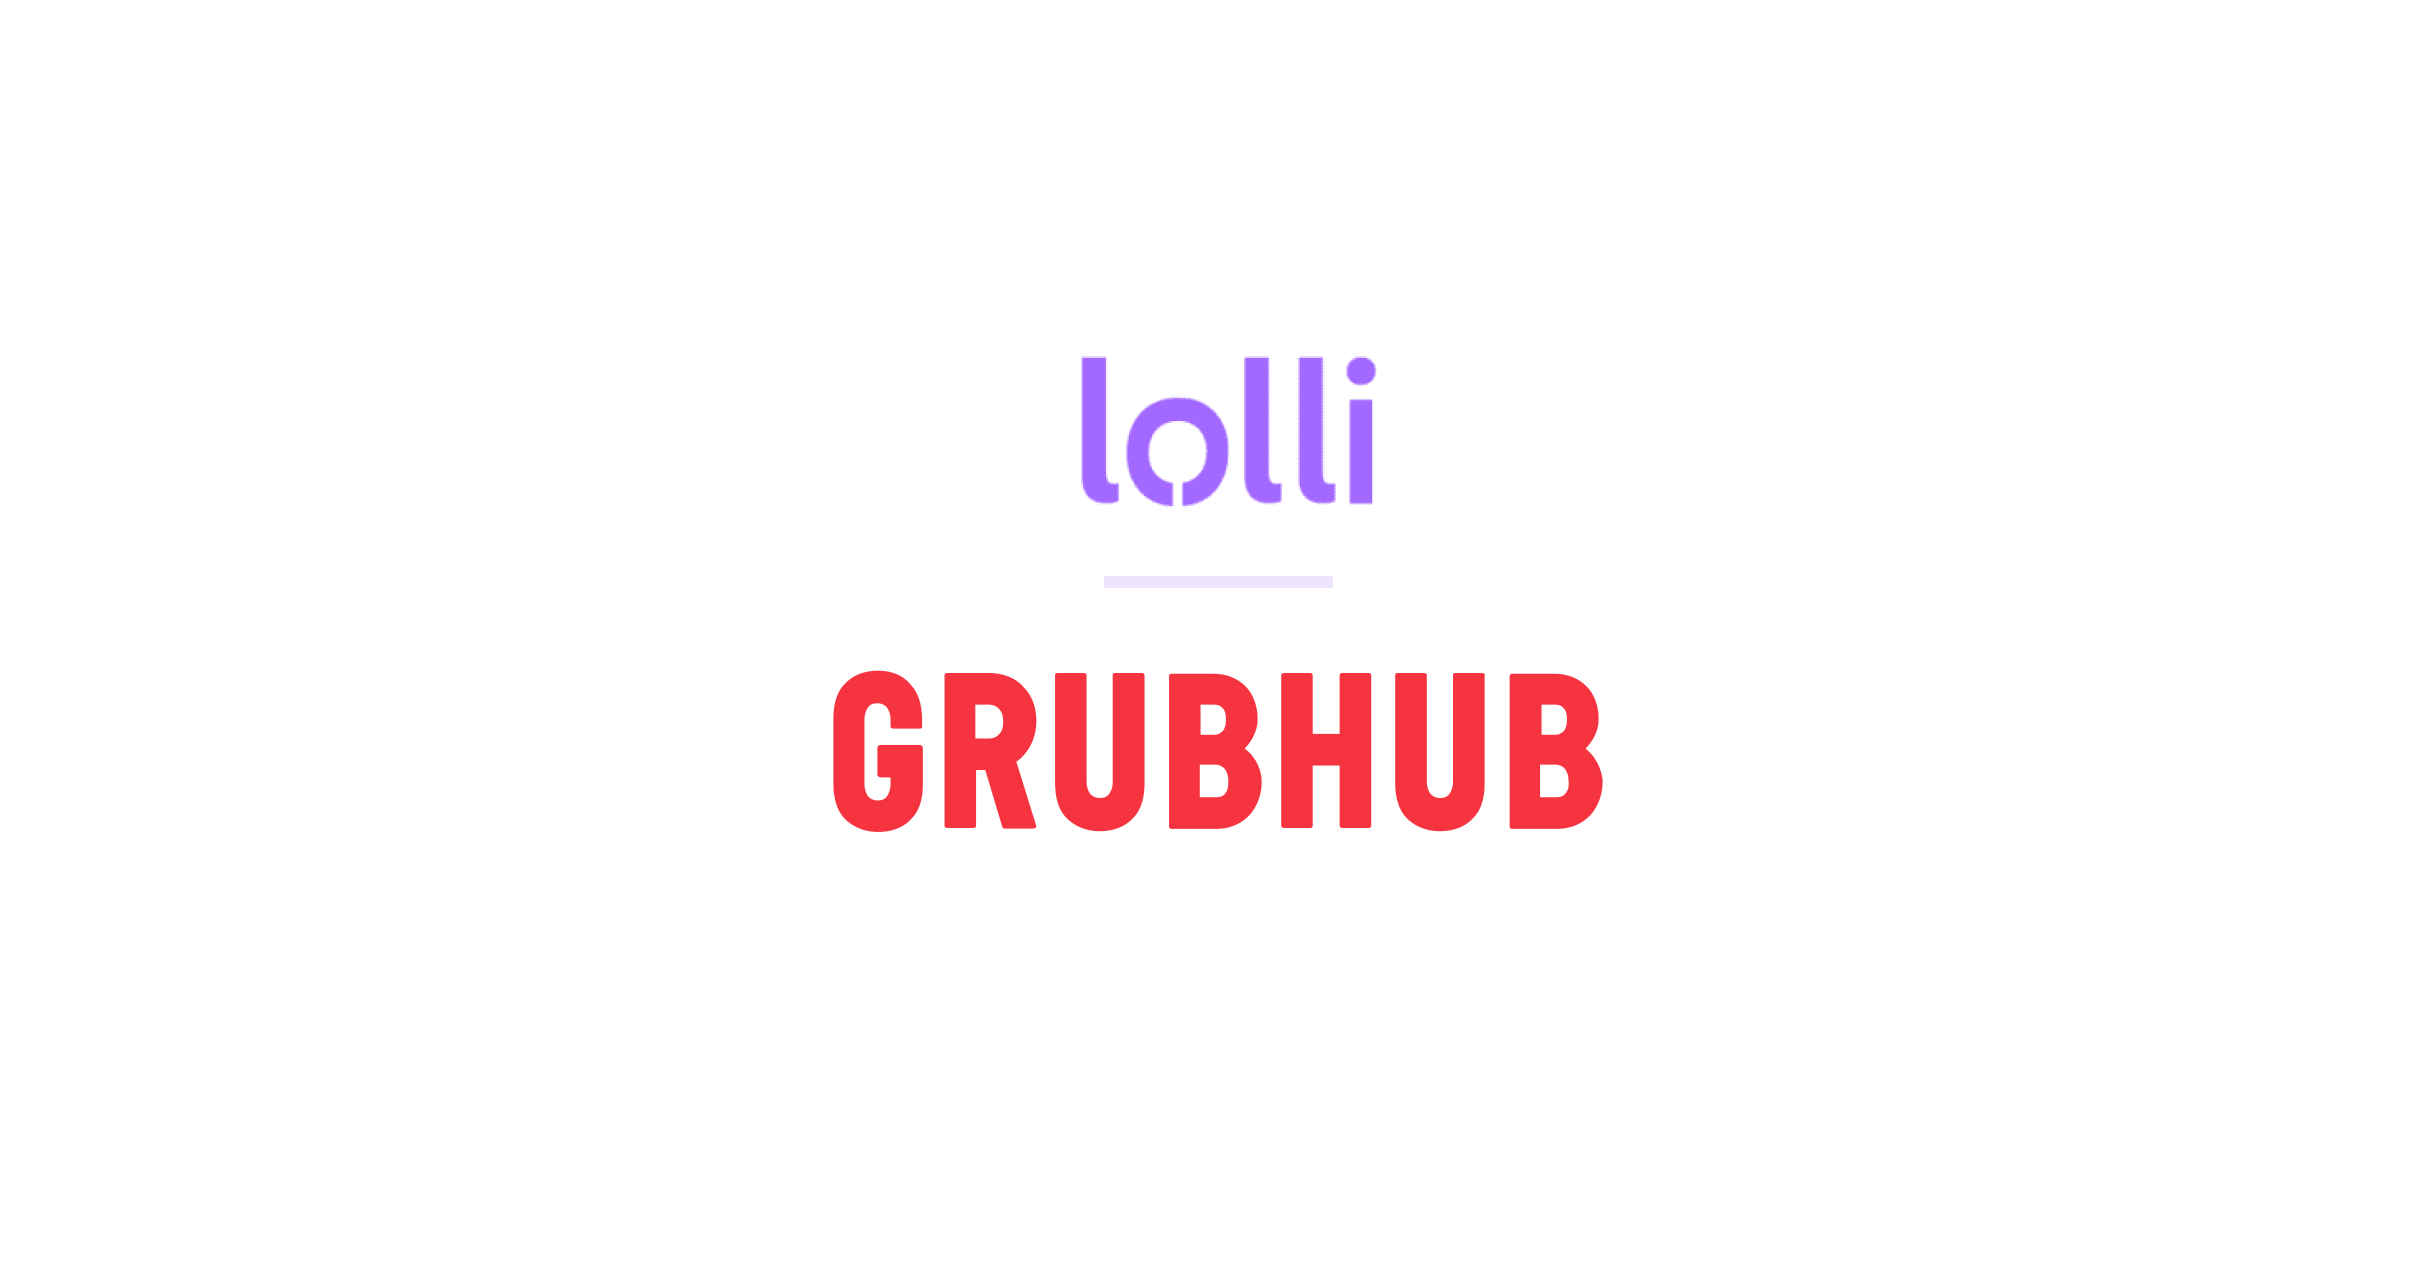 Grubhub Partners with Lolli to Give Free Bitcoin Rewards on Food Delivery